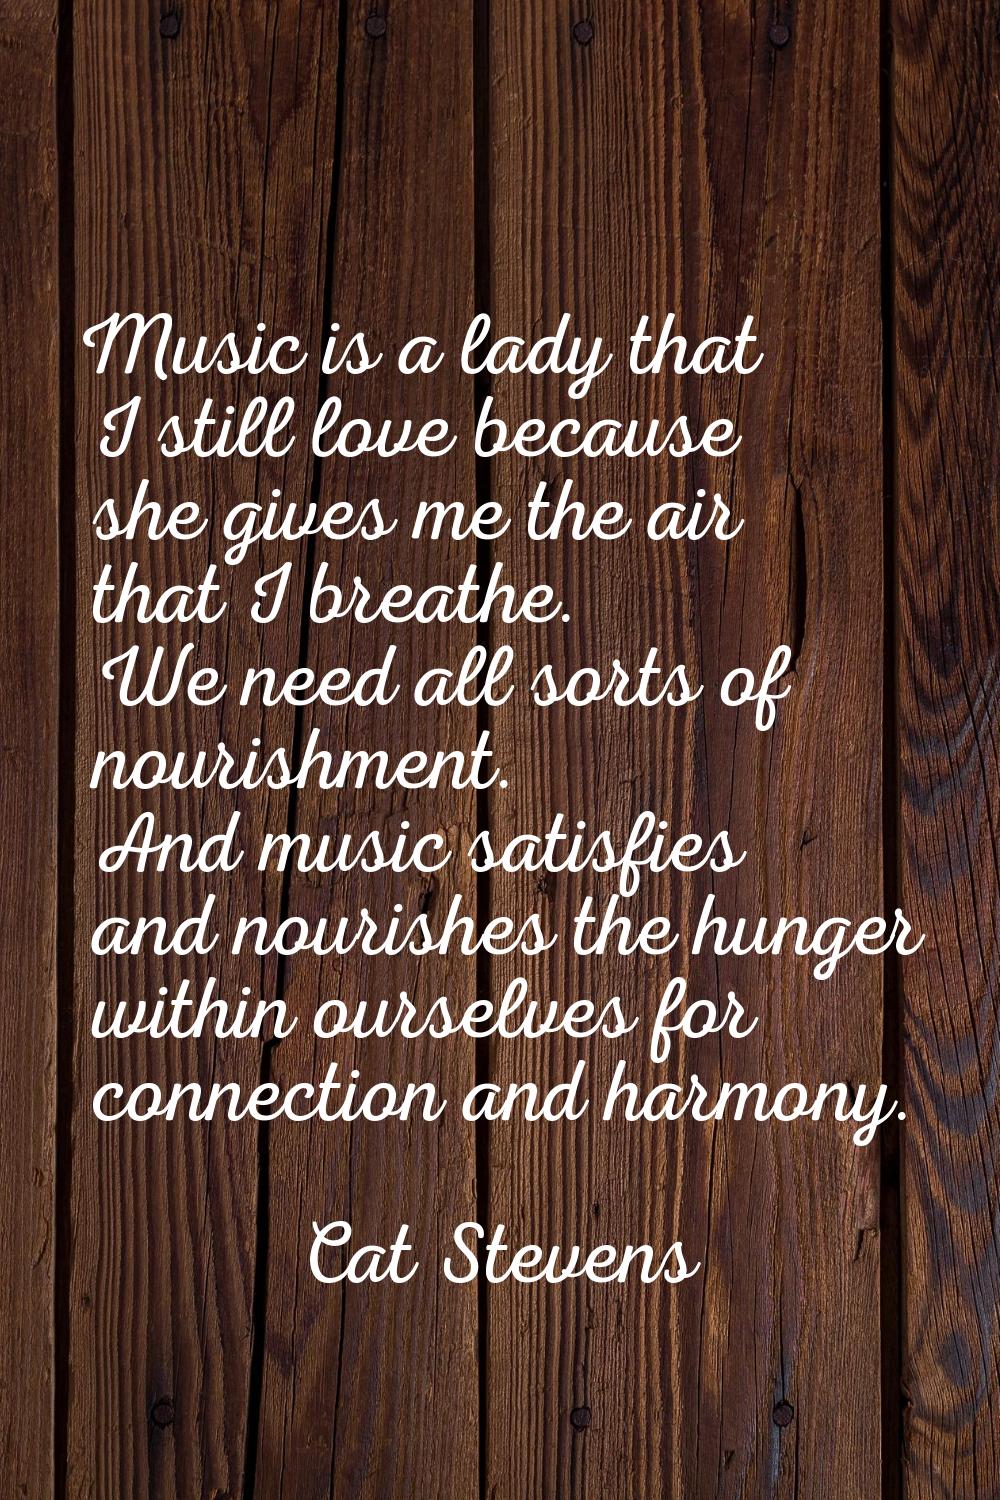 Music is a lady that I still love because she gives me the air that I breathe. We need all sorts of